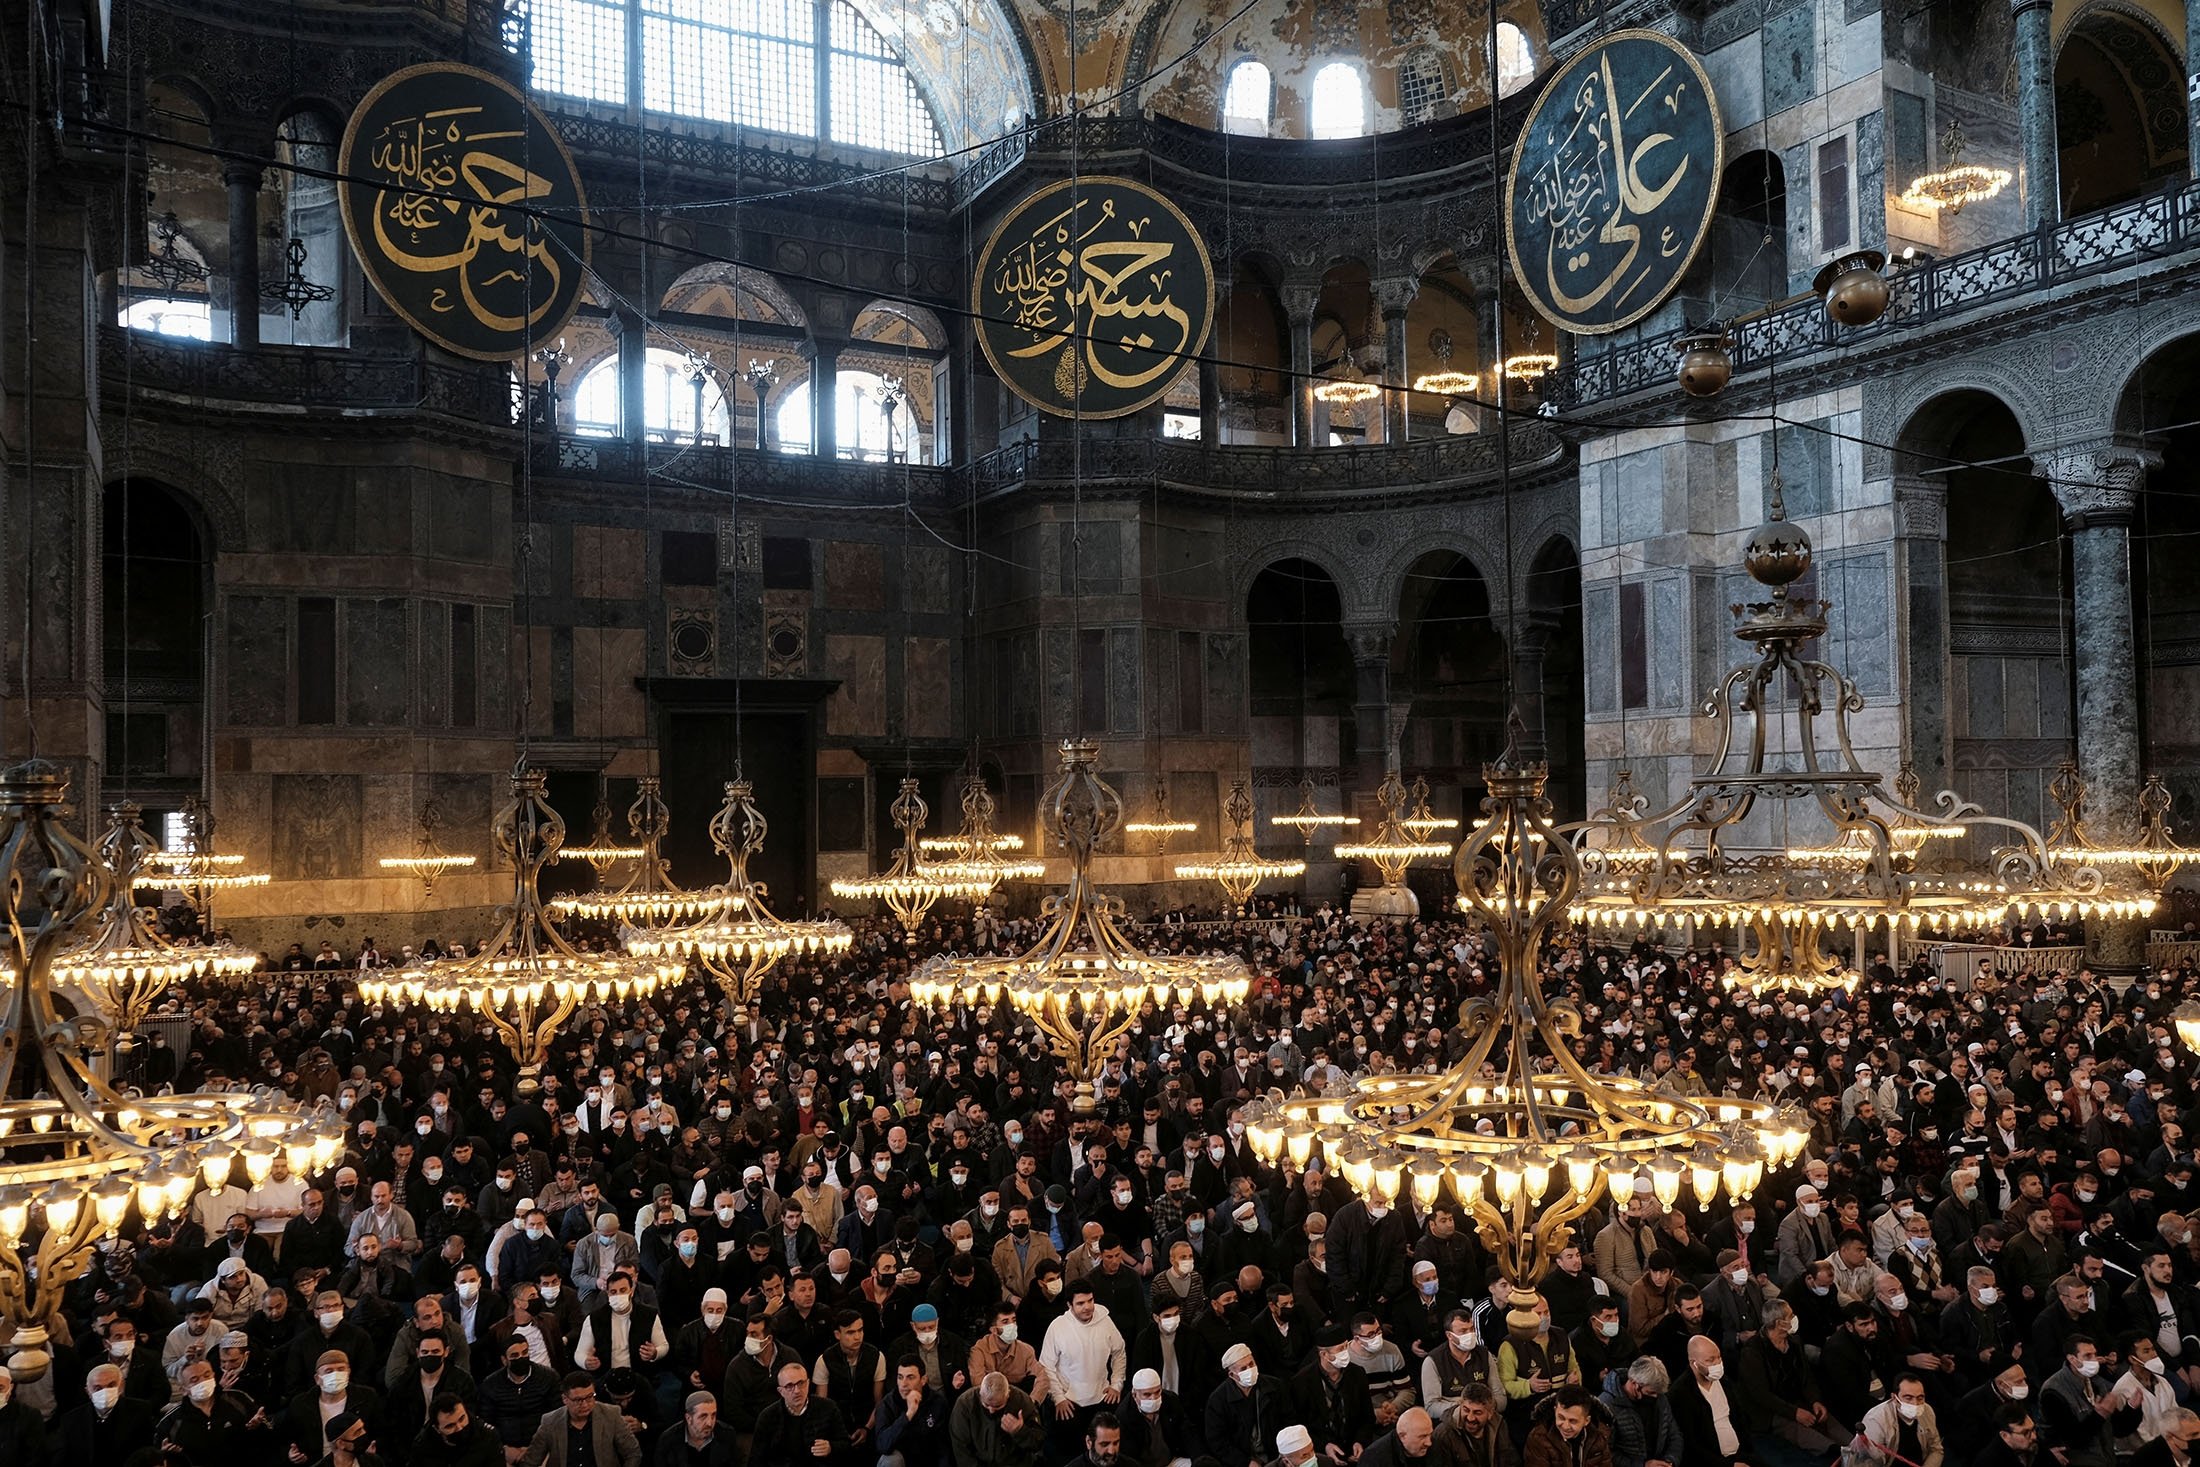 Muslims attend the first Friday prayer of Ramadan, at Hagia Sophia Grand Mosque in Istanbul, Turkey, April 8, 2022. (Reuters Photo)